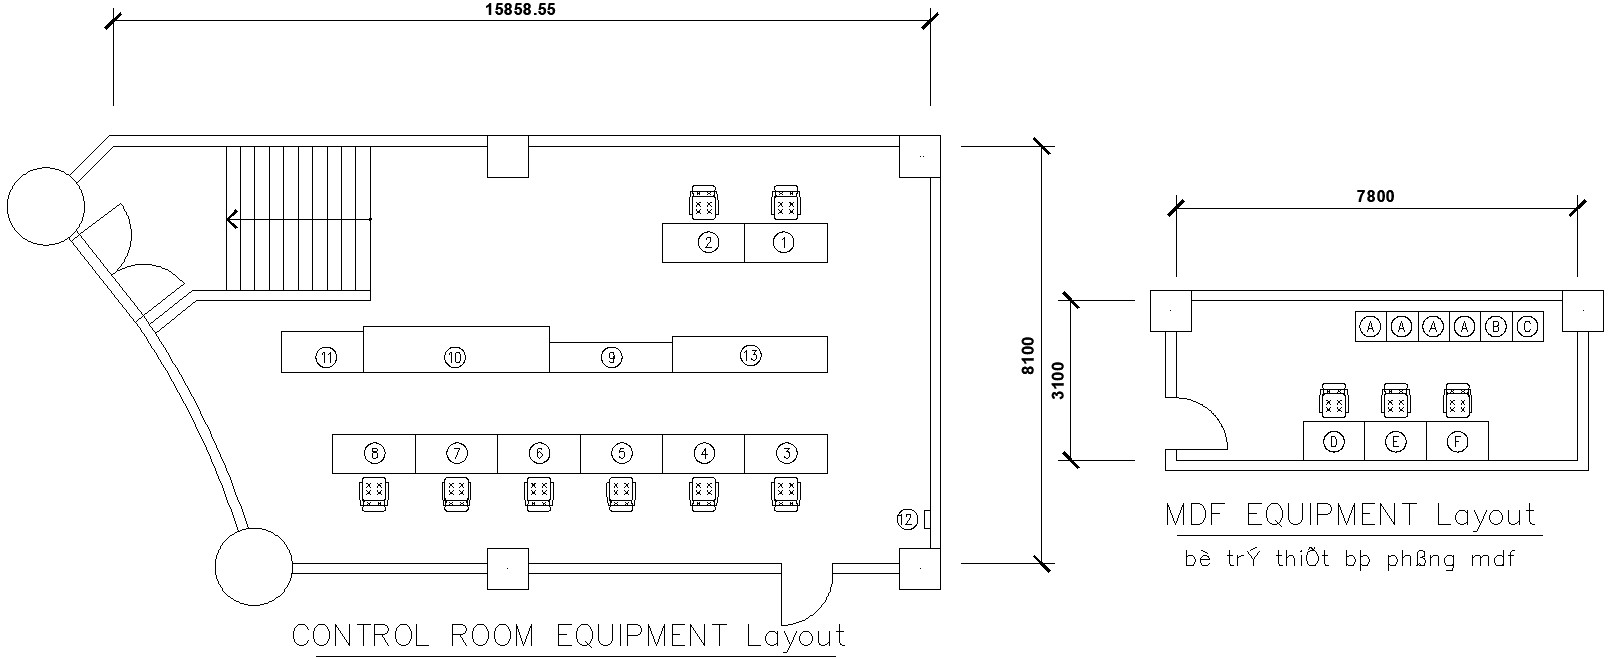 AutoCAD file shows the details of the MDF and control room equipment ...